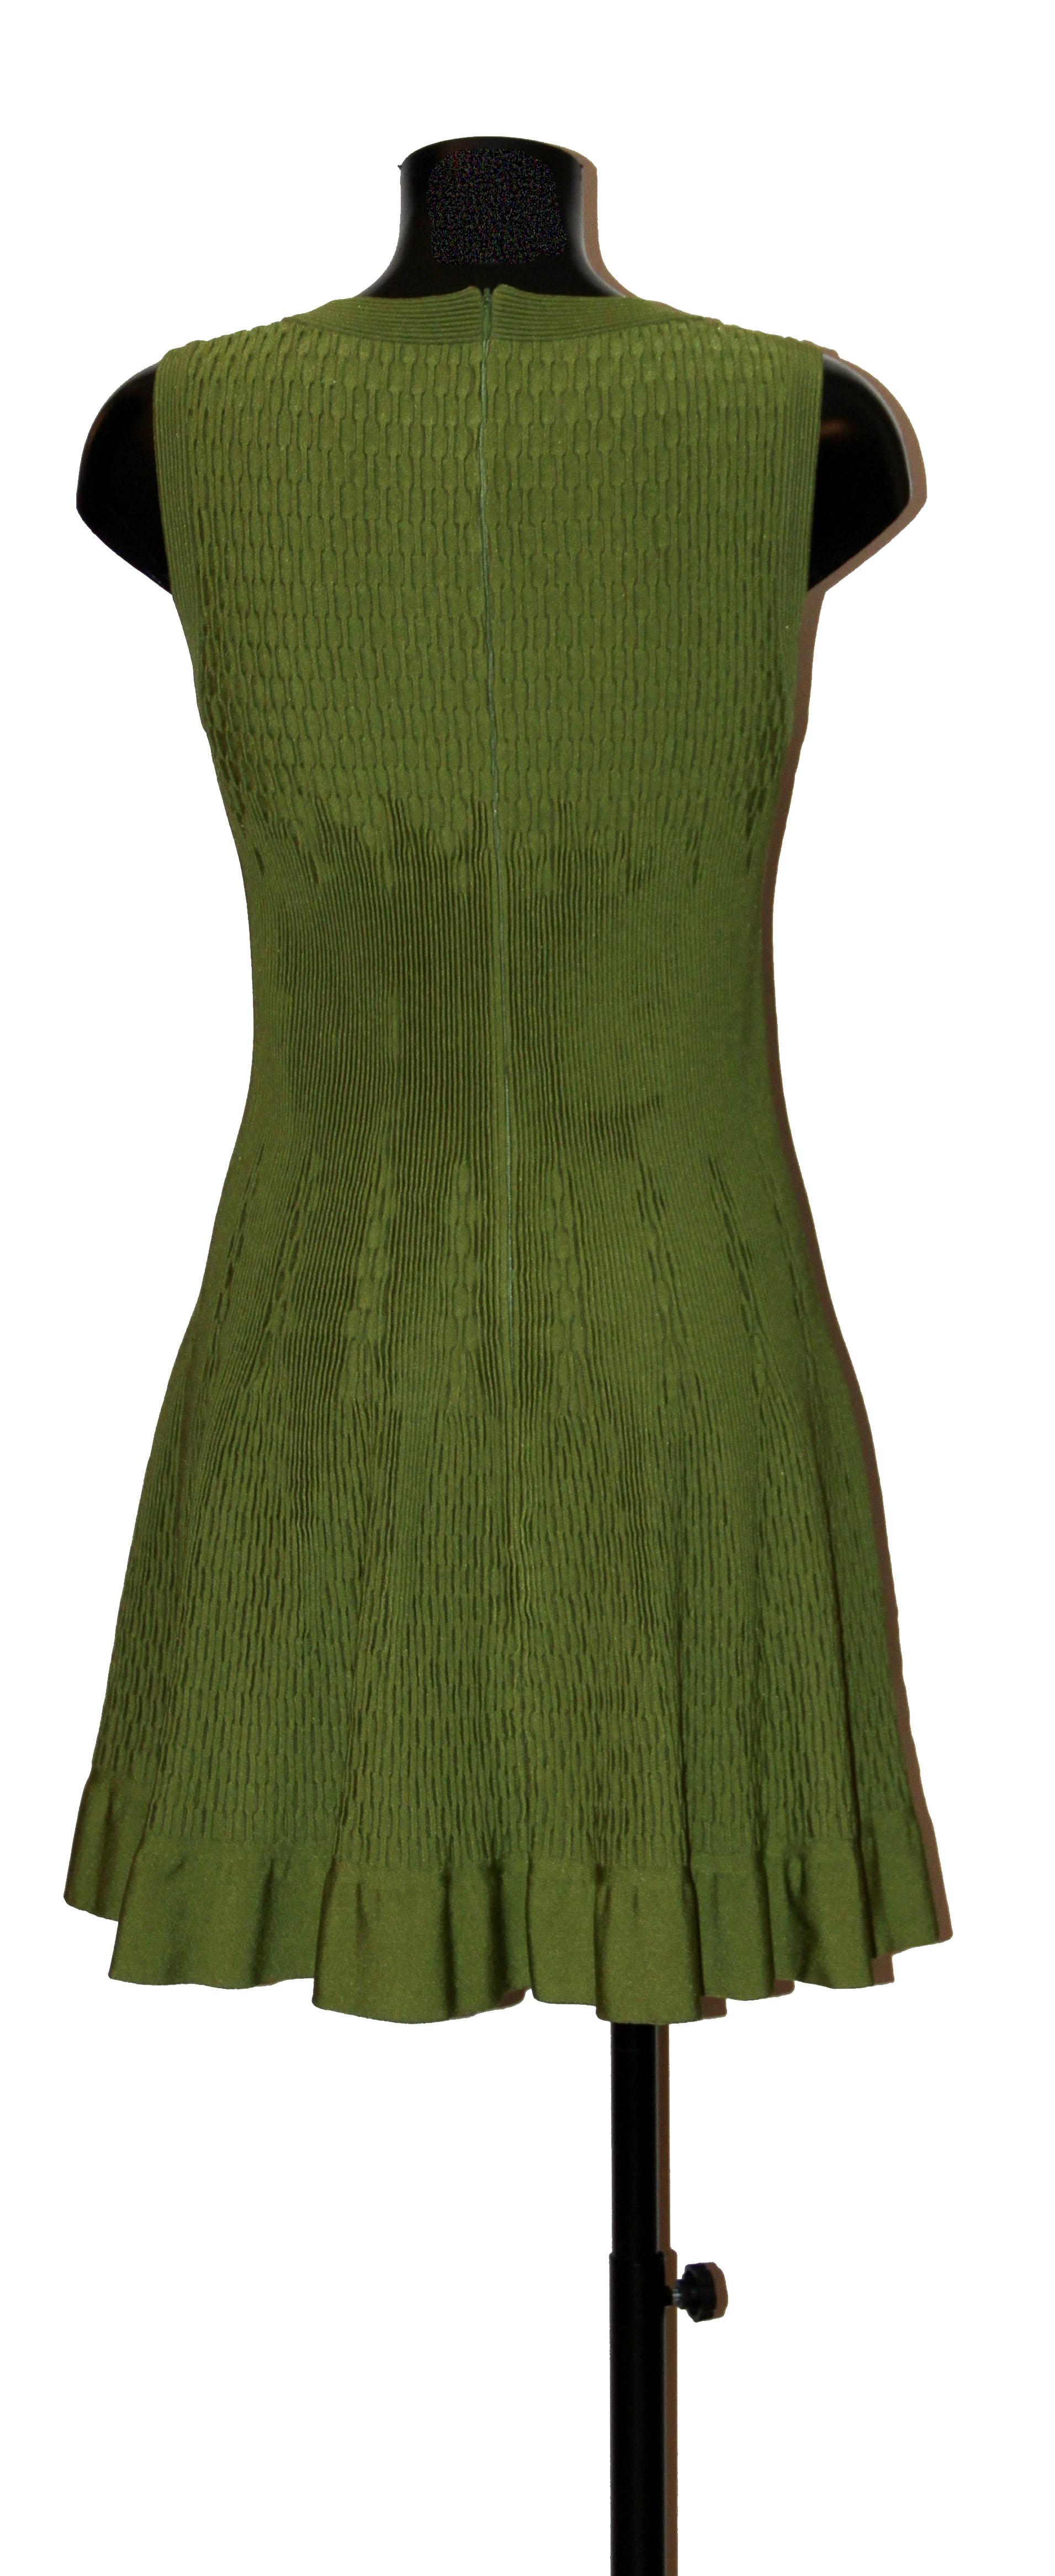 Azzedine Alaïa's great lines are so beutifully represented in this lovely flare dress.
It is crafted in a lime green knit mesh fabric.
The neckline is squared and the waist is tapered.
The length is to the knee and the dress is finished by a ruffle